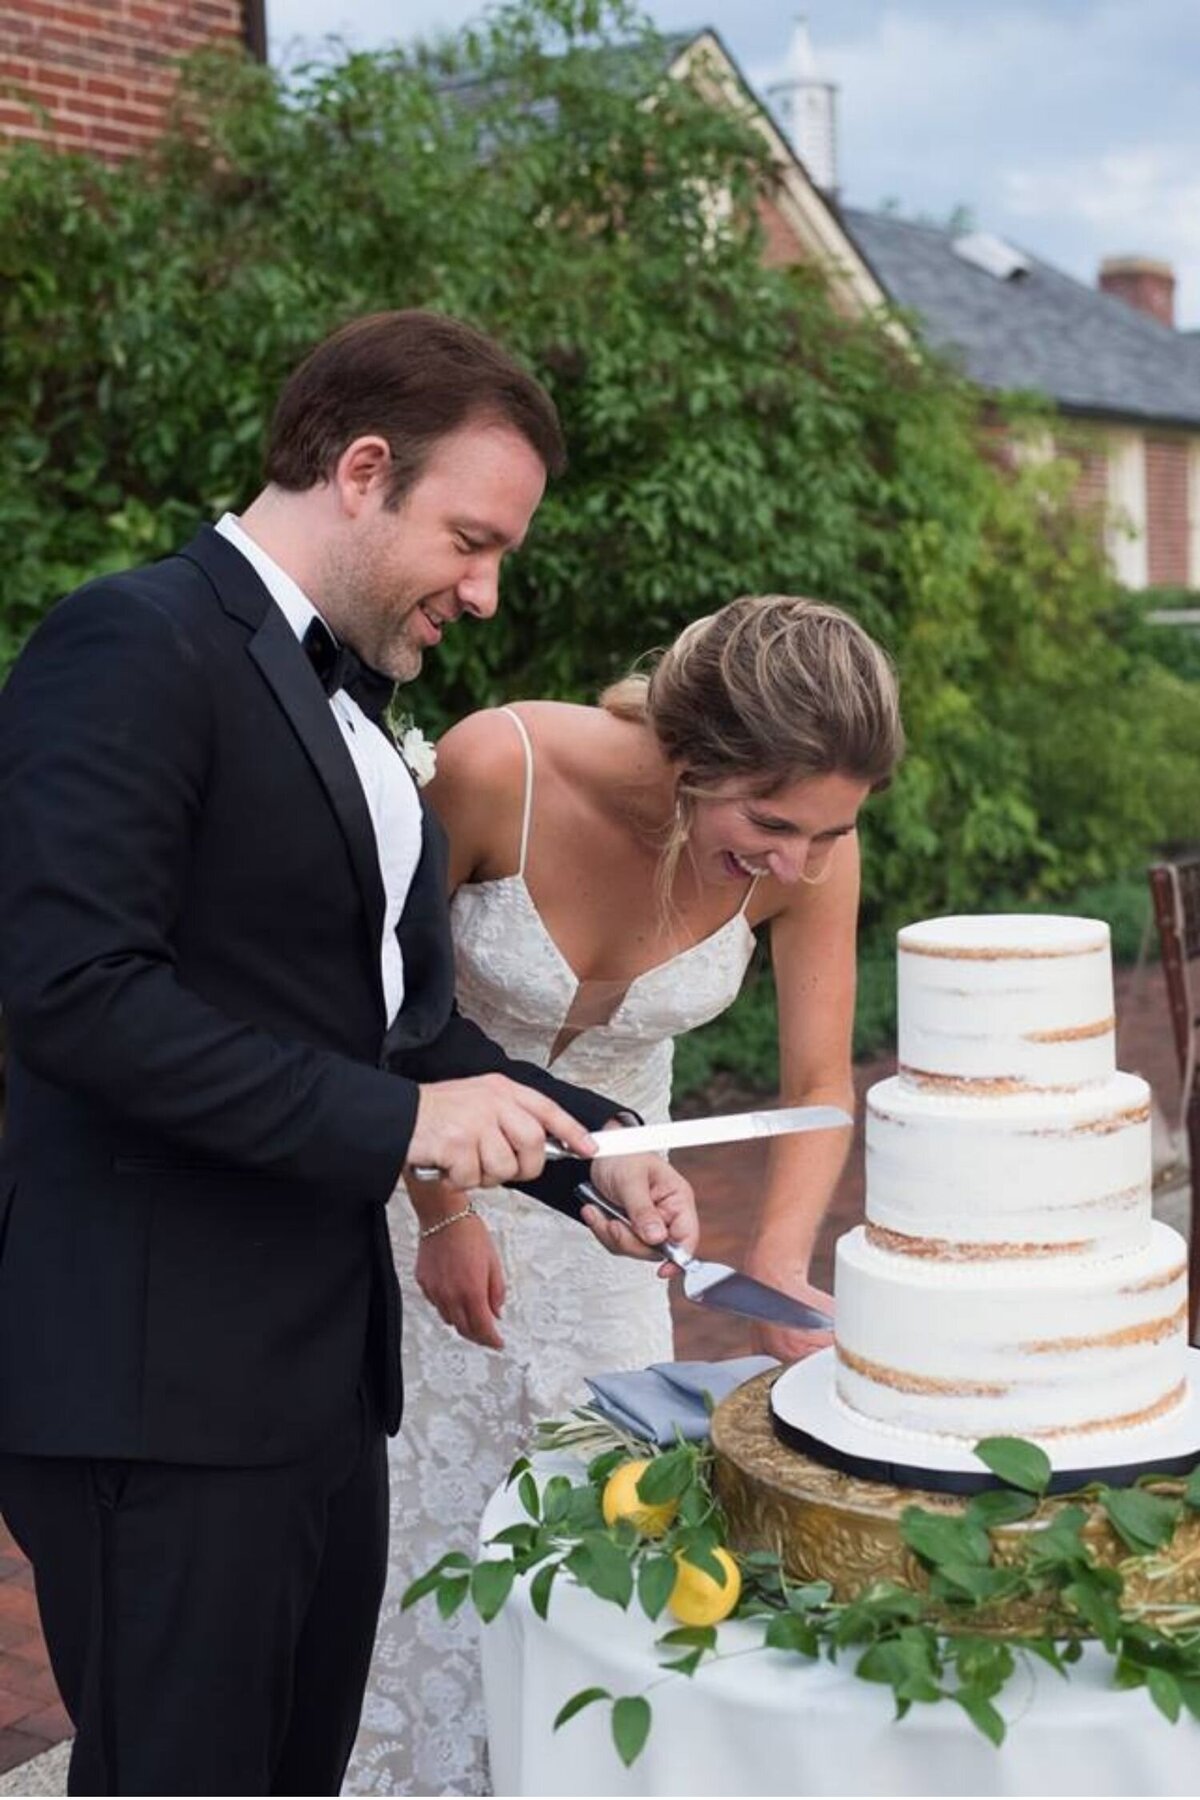 Bride and groom cut their wedding cake with lemon and greenery accents at their luxury Italian inspired Chicago North Shore wedding.